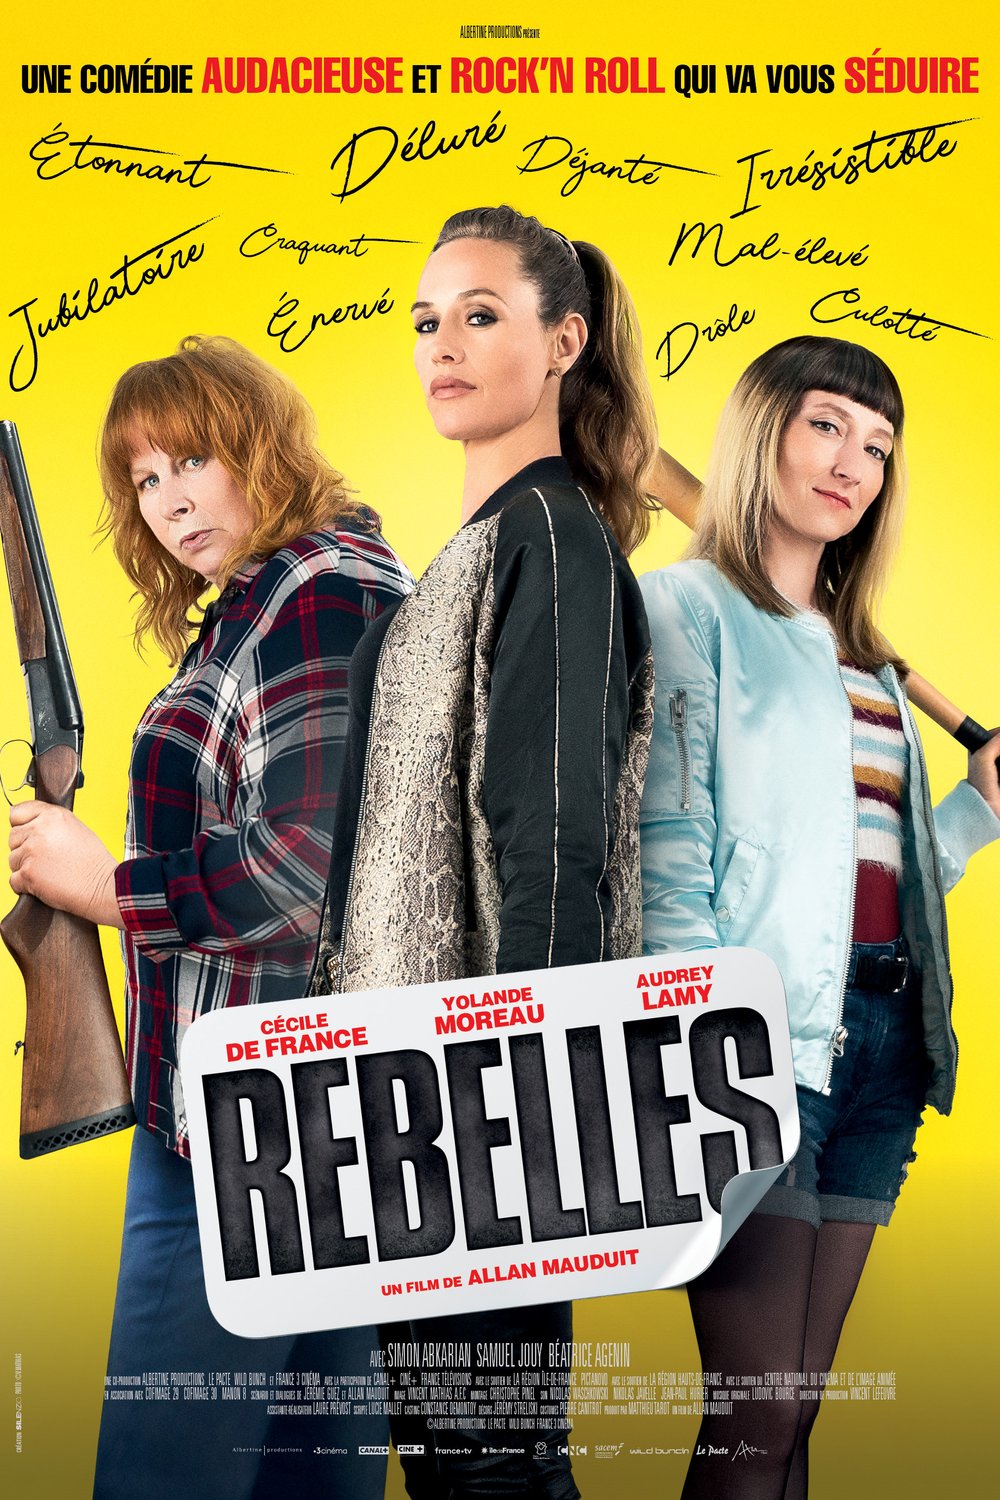 Poster of the movie Rebelles